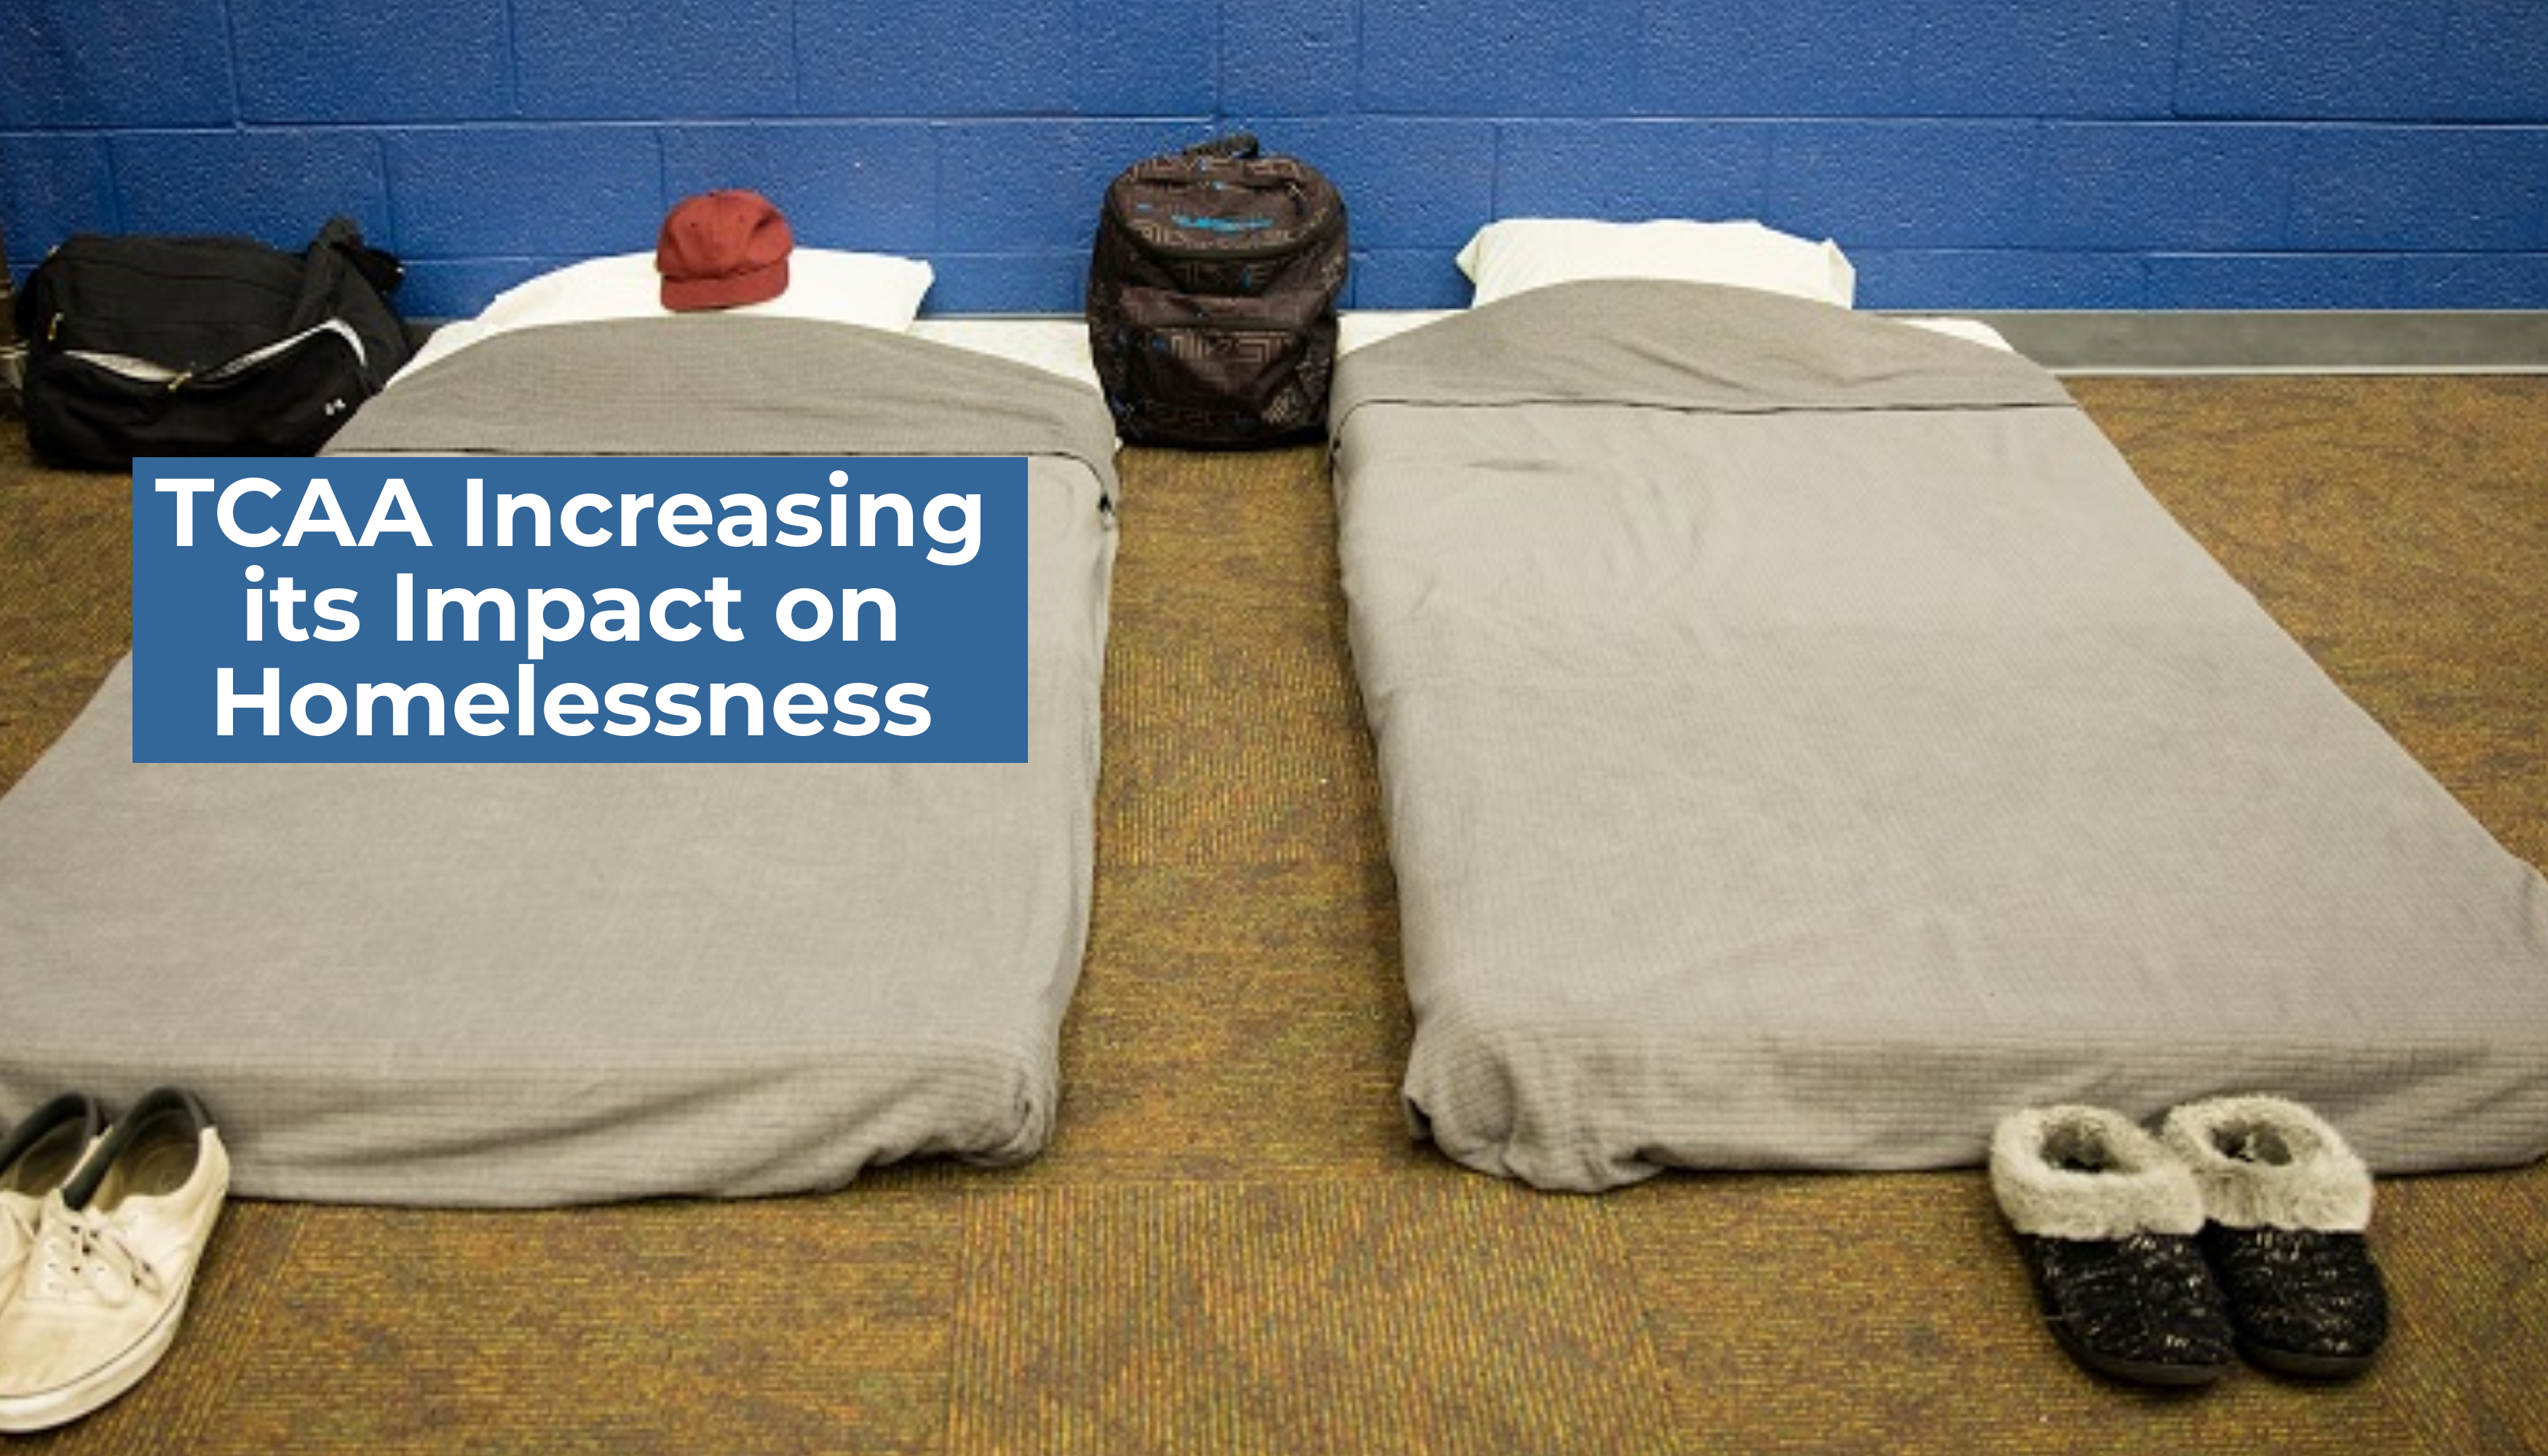 TCAA Increasing its Impact on Homelessness